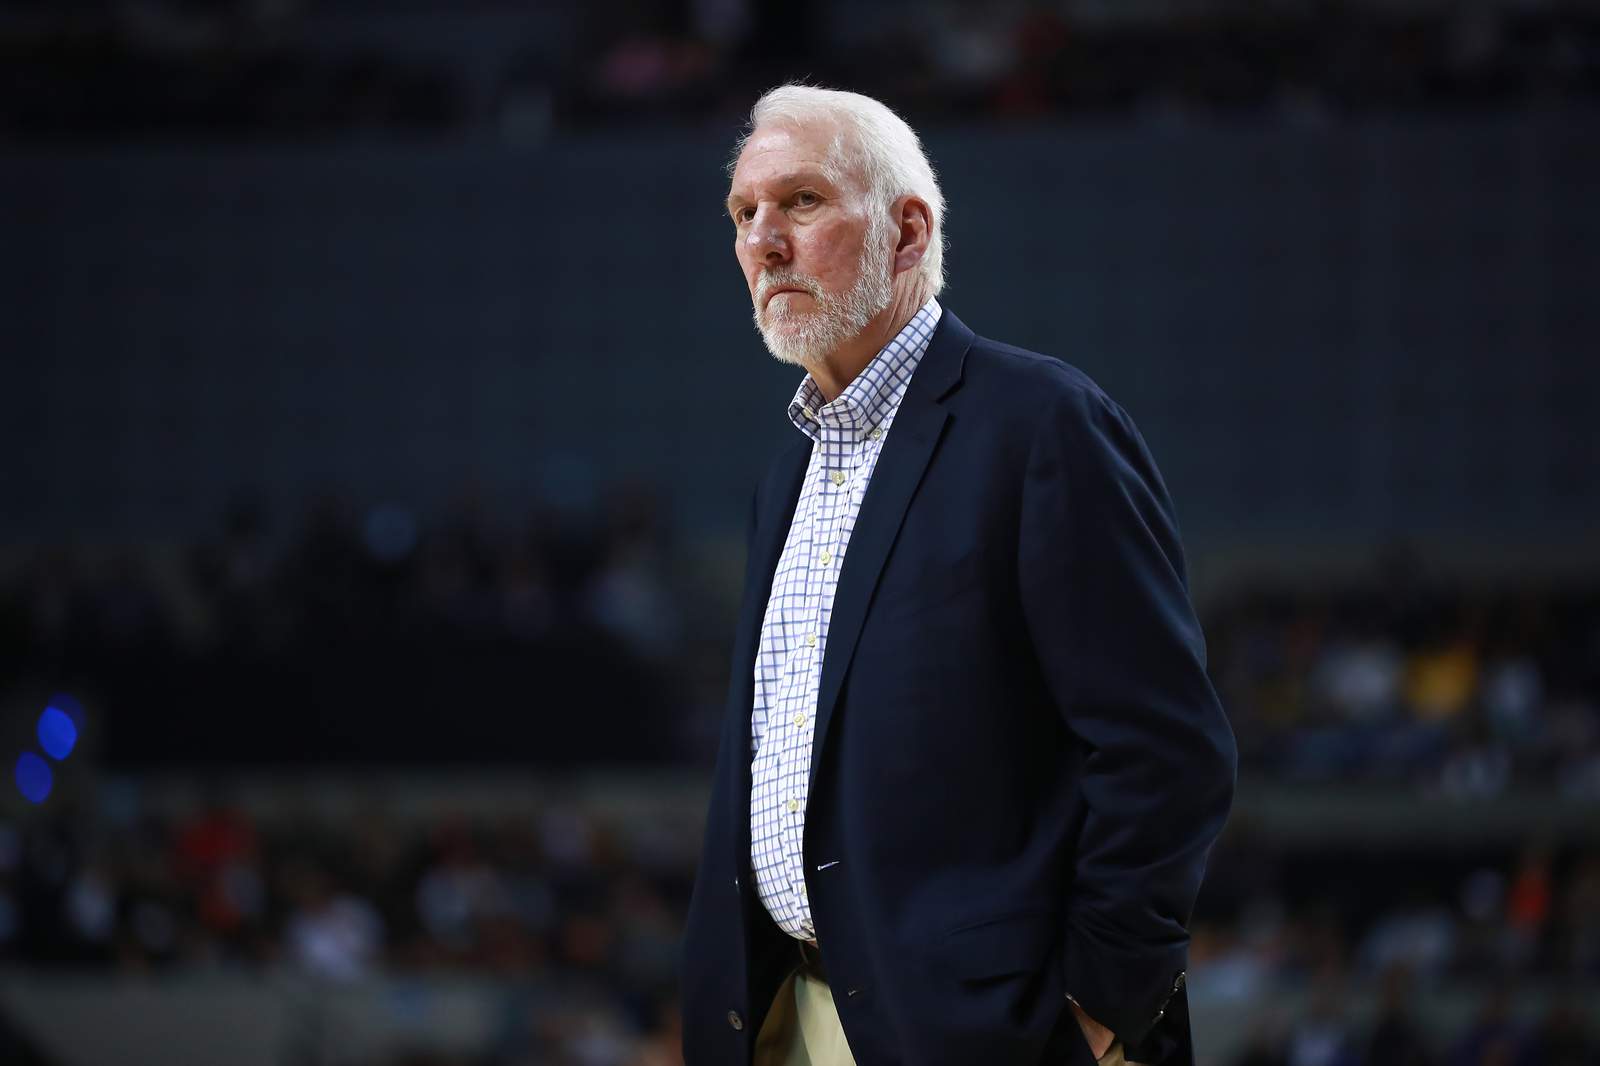 Spurs coach Gregg Popovich denounces killing of George Floyd, joins NBA coaches committee on racial injustice